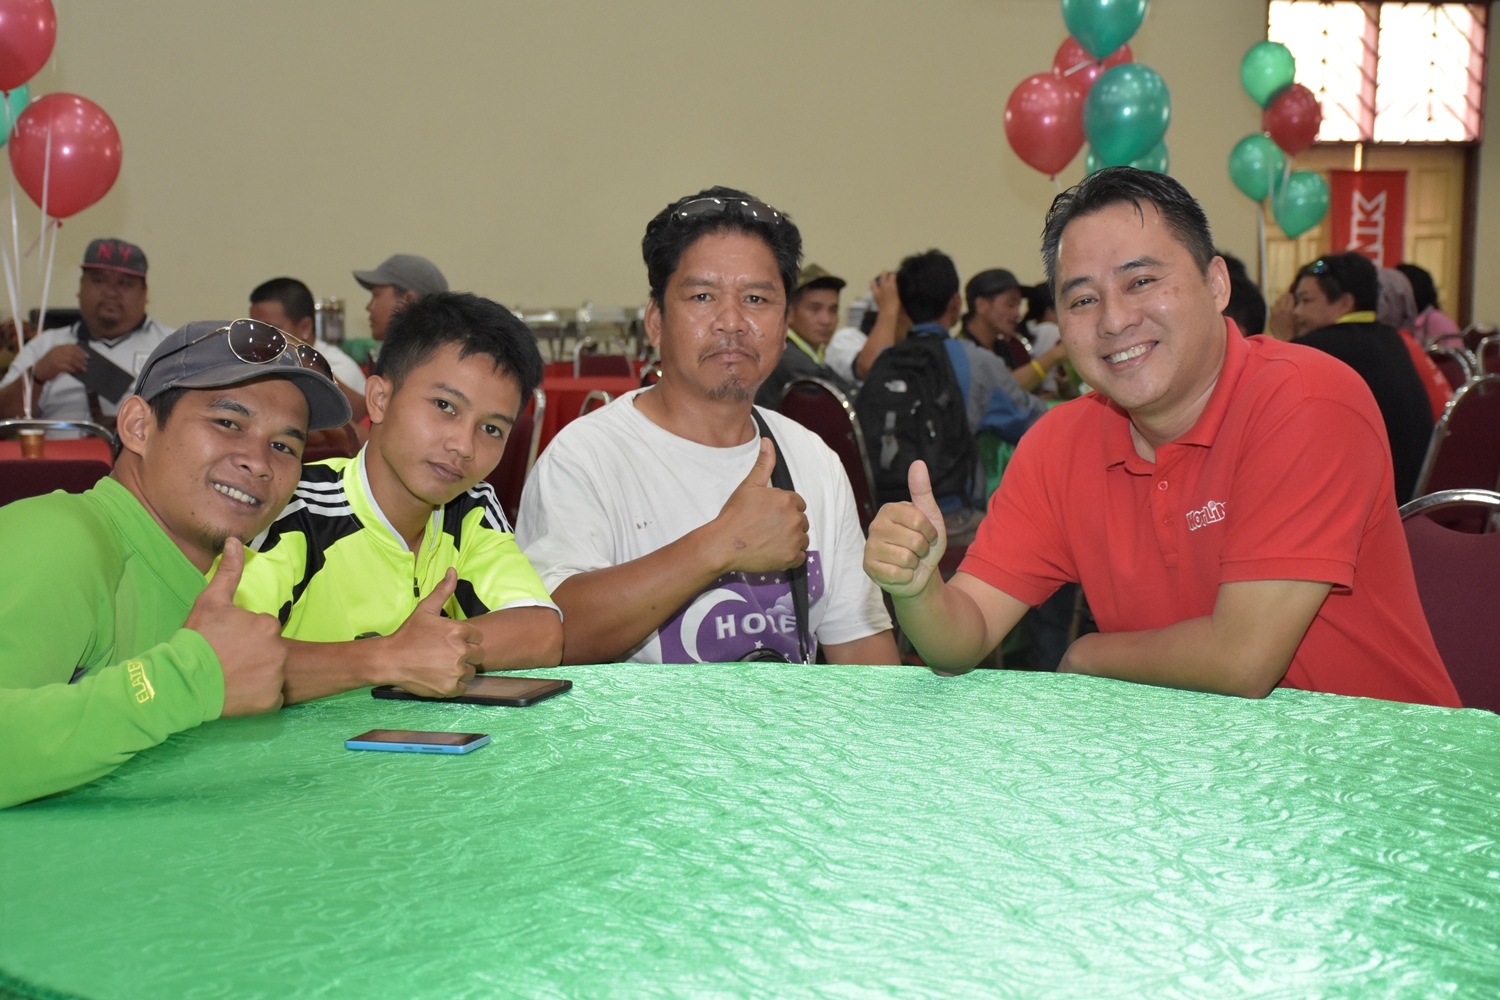 Photo 2: Spending time with Kinabalu mountain guides at Maxis’ Christmas charity do. (From right - Melvin Jeffrine Mojinun, Maxis Head of Sabah Region and the mountain guides)